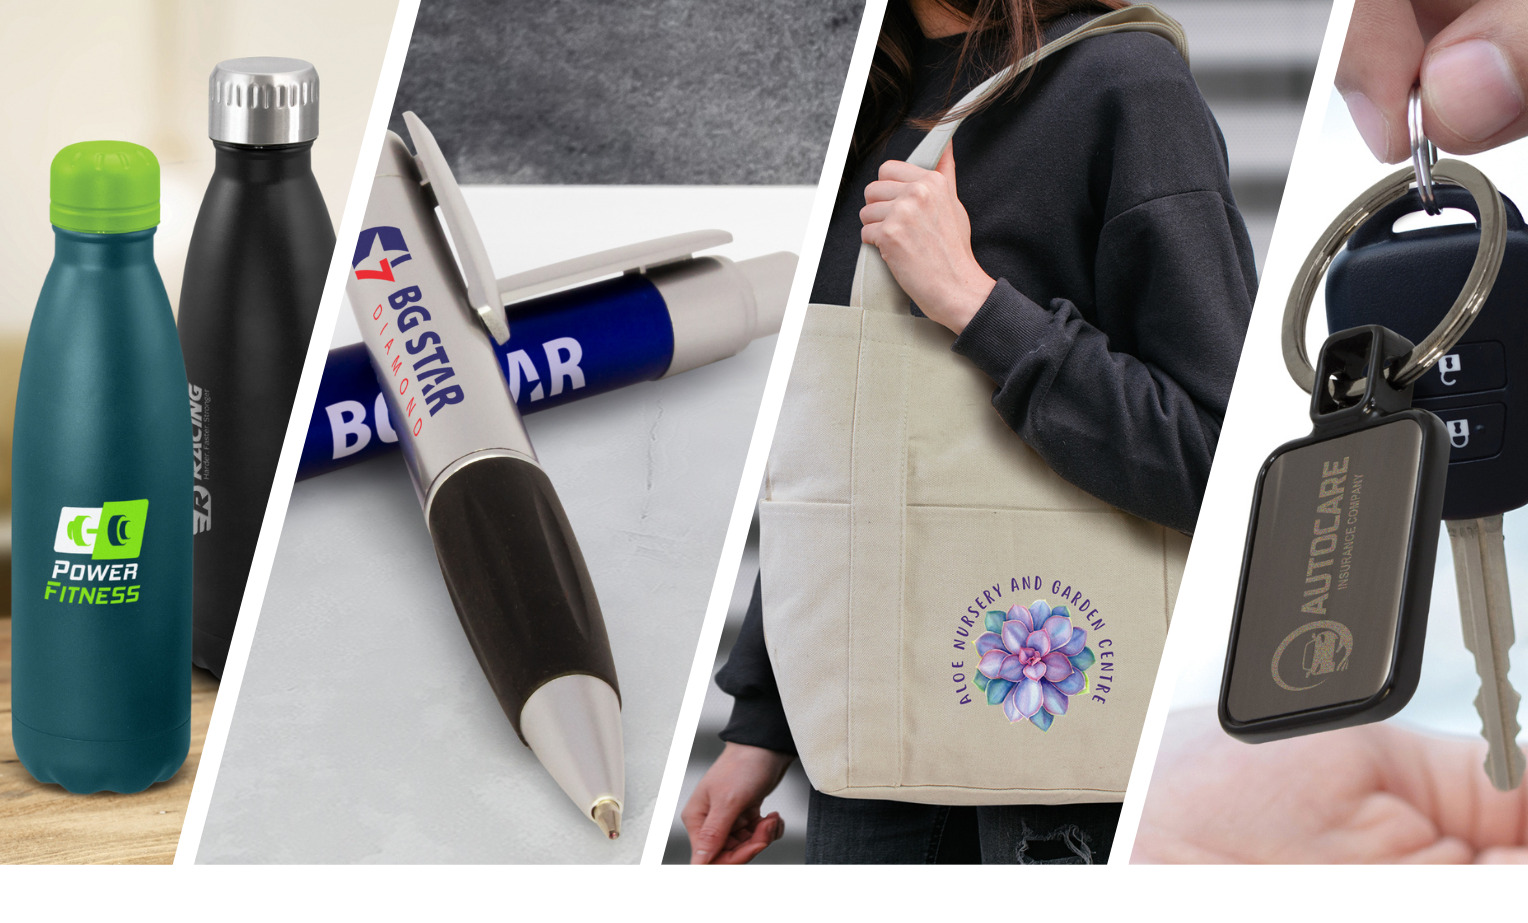 Adelaide’s Branding Boost: Top Promotional Products for Your Business